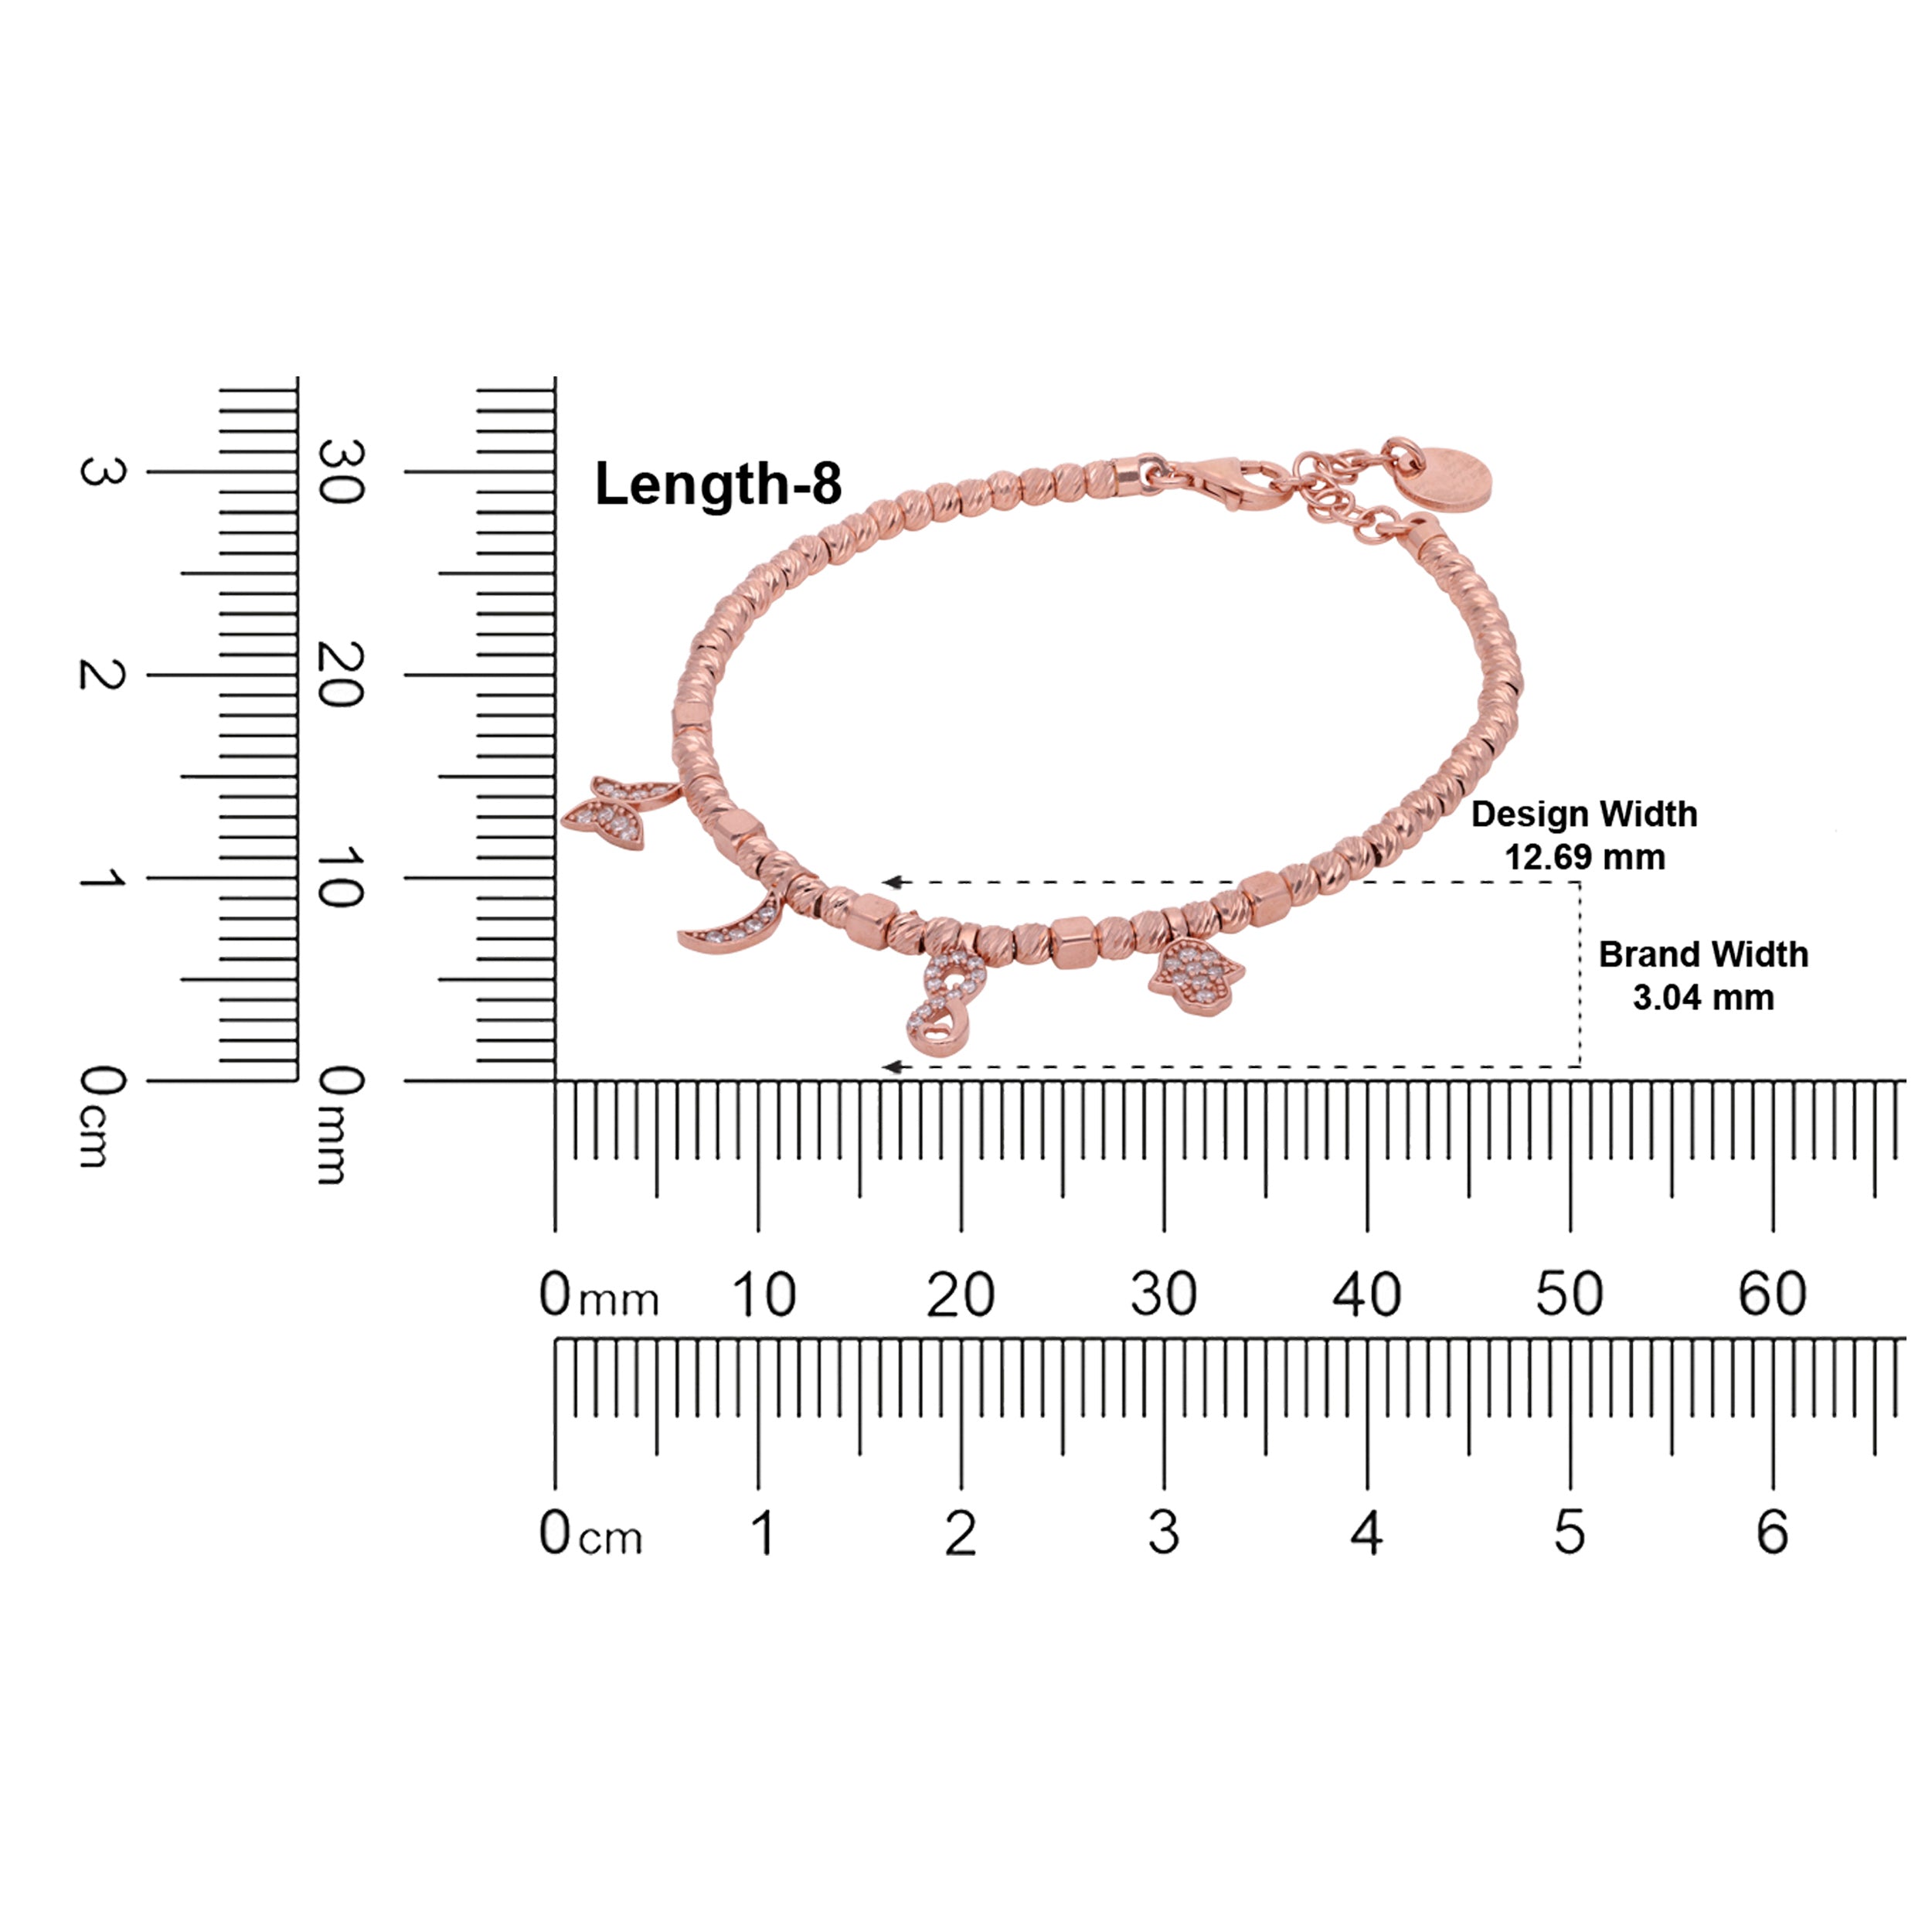 Rose Gold Chain Bracelet with Fancy Design and Cubic Zirconia | SKU : 0003109991, 0003109977, 0003109984, 0003110003